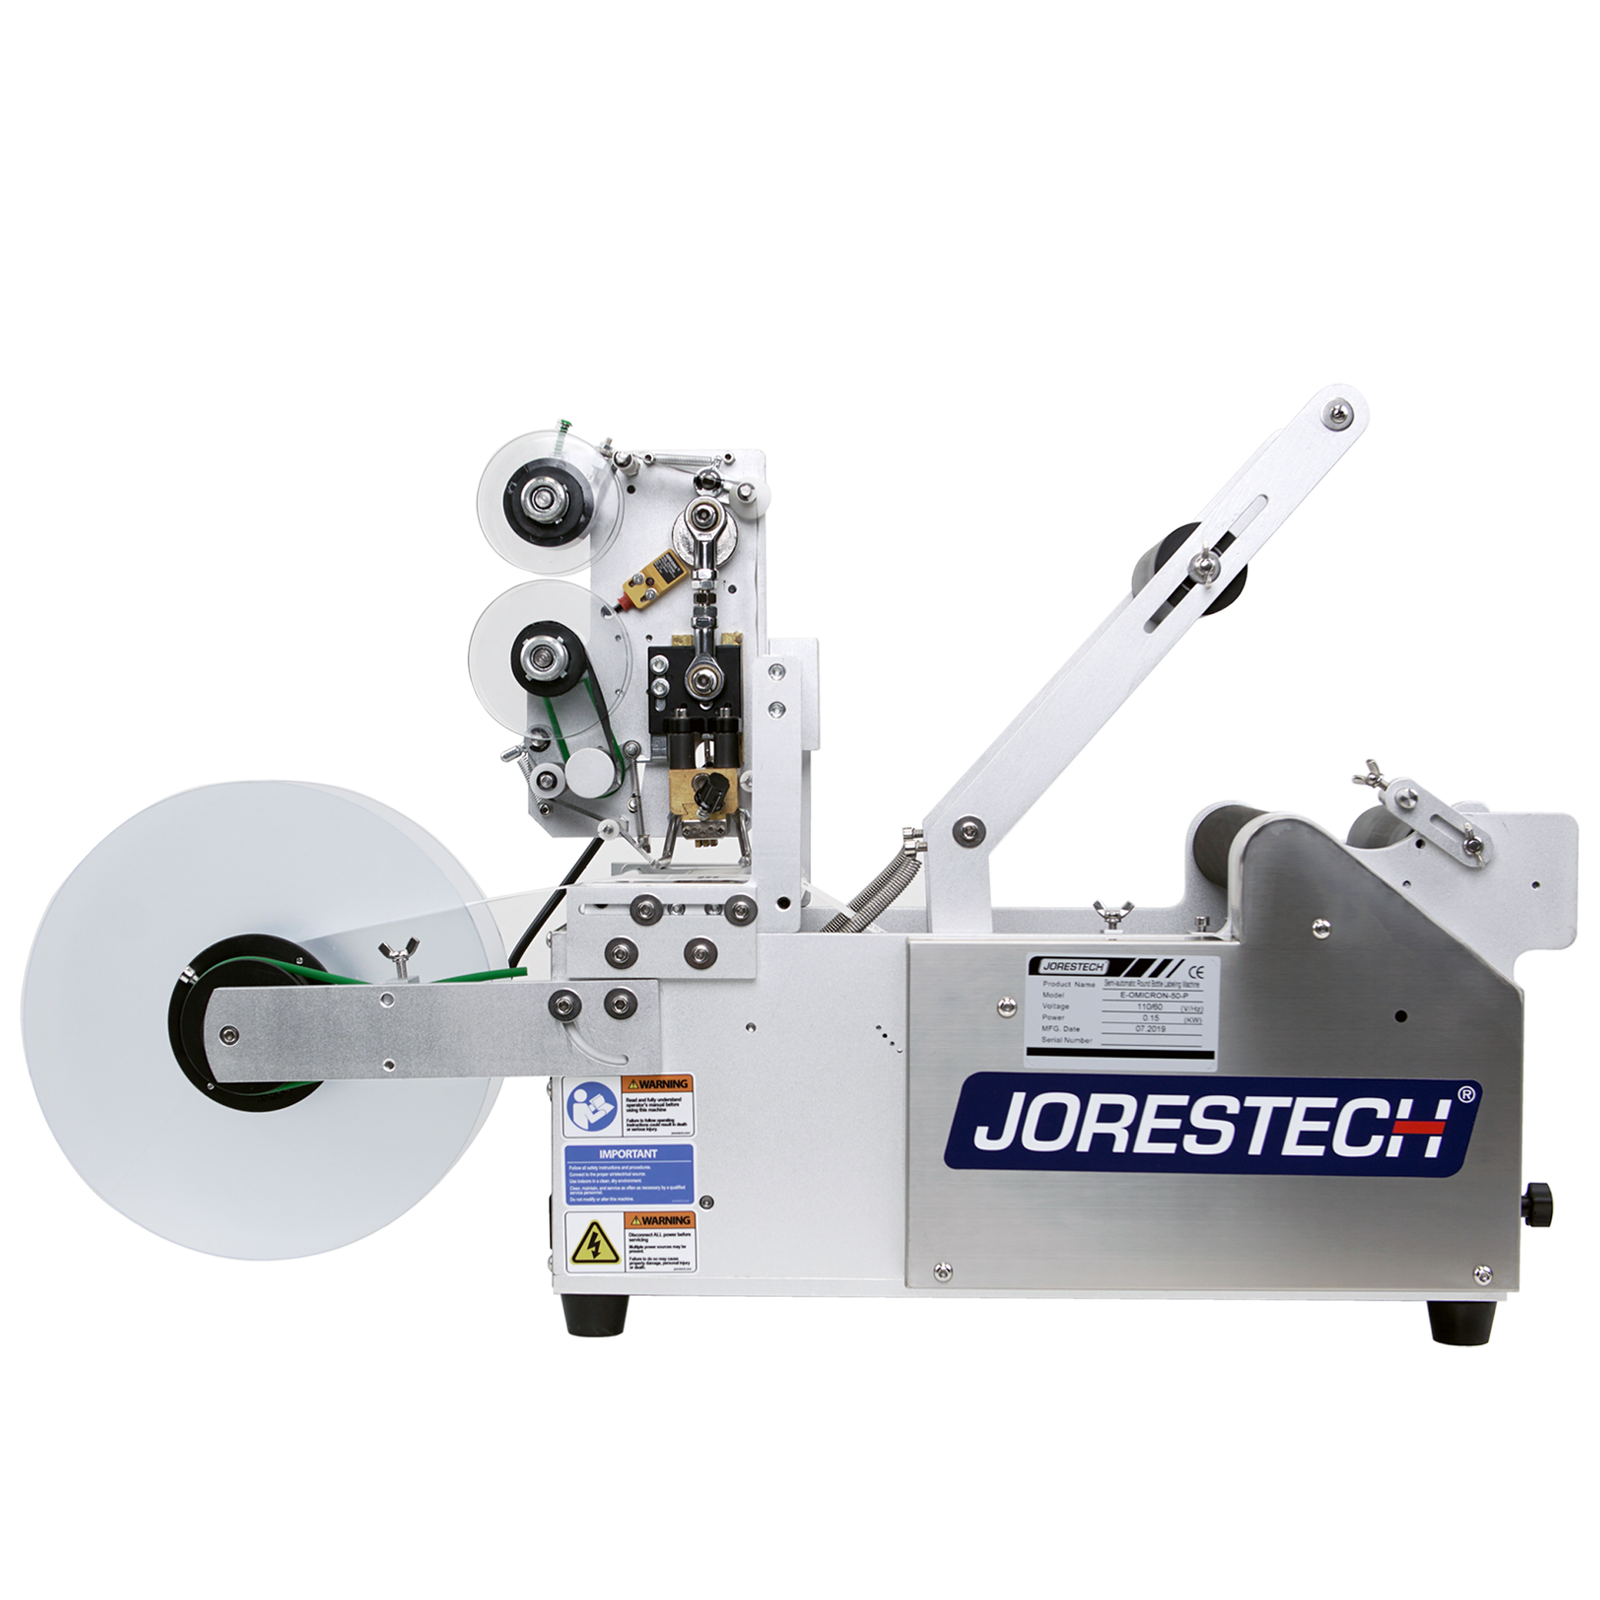 front view of label applicator with its printer and the roll dispenser. Also shown in the image a set of warning decals and a blue and white Jorestech Logo